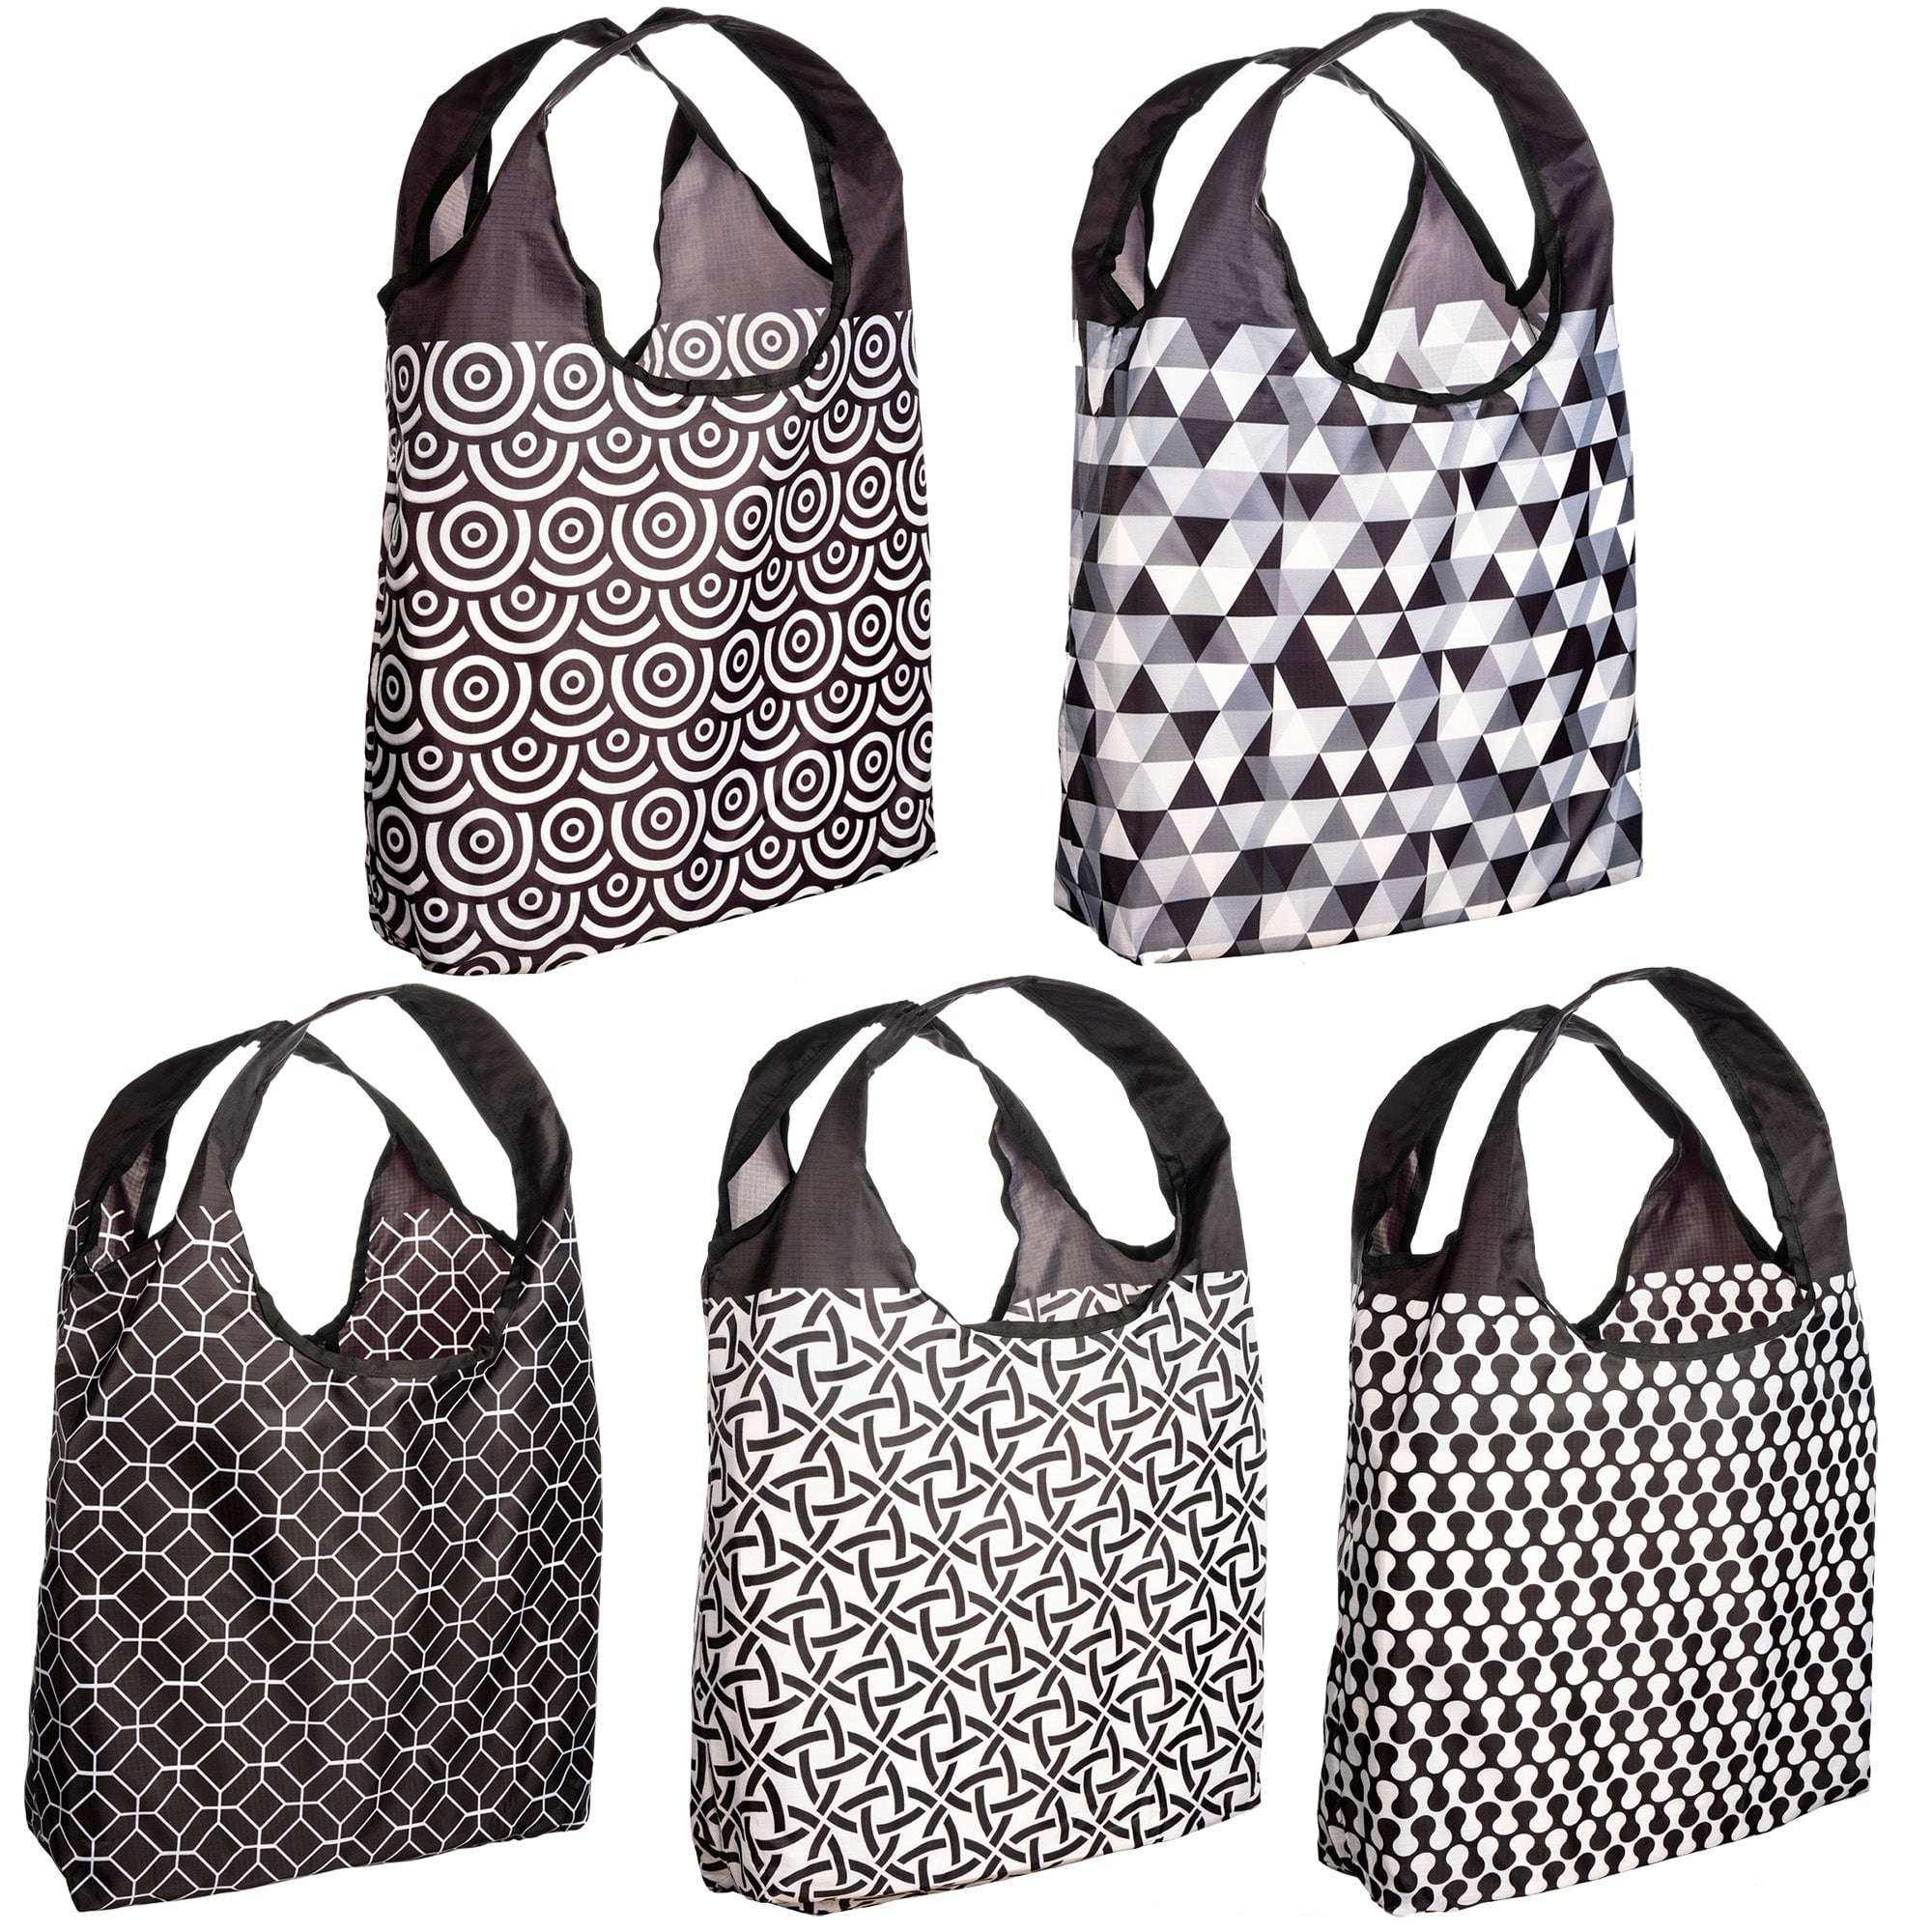 O-WITZ 5-Pack Reusable Shopping Bags 